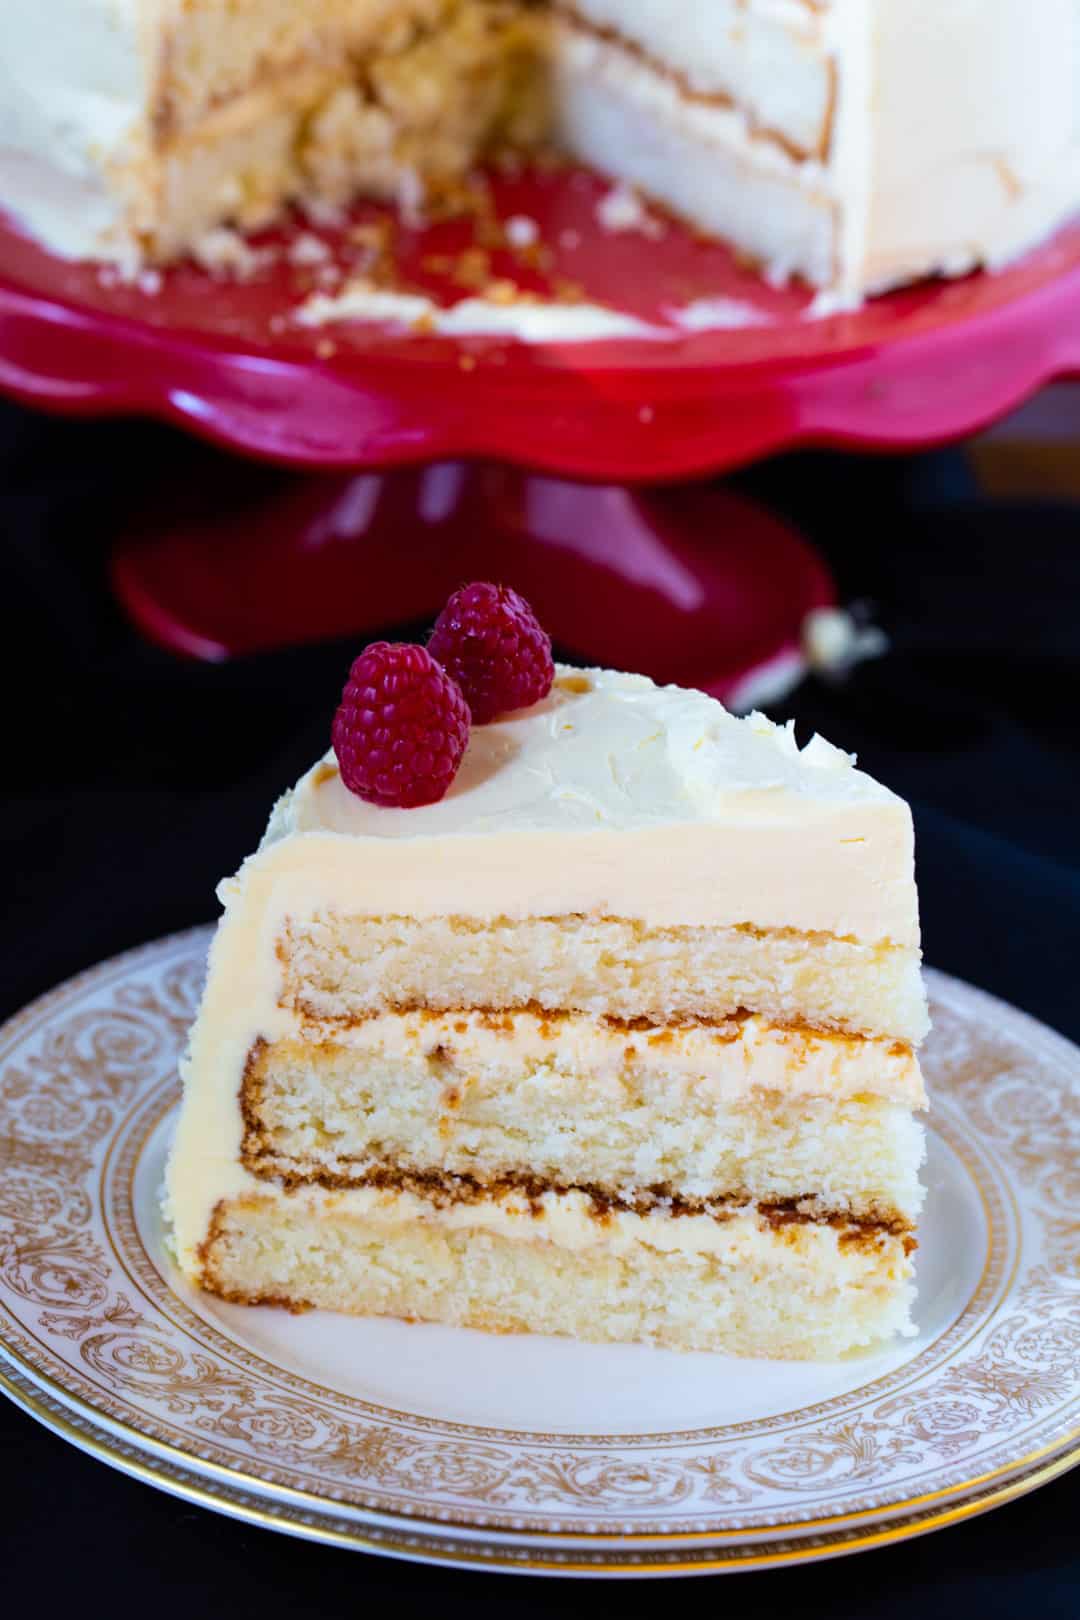 Slice of cake topped with fresh raspberries.